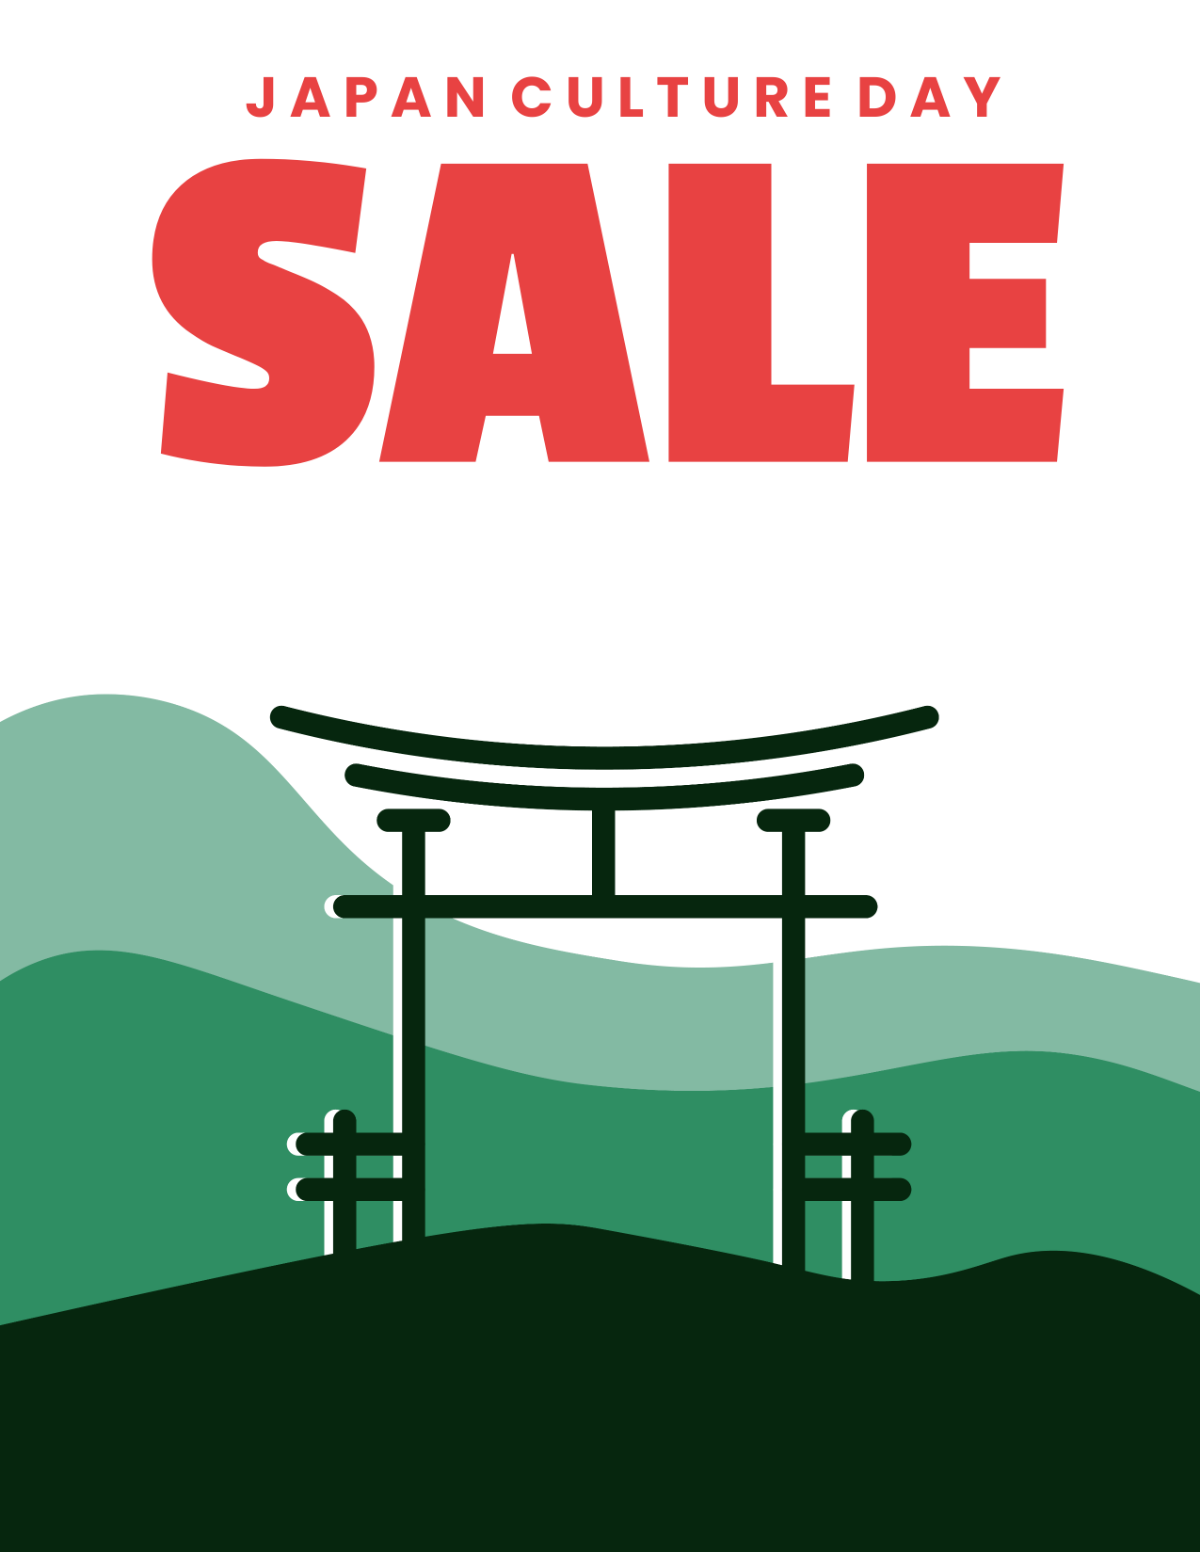 Japan Culture Day Sales Flyer Template